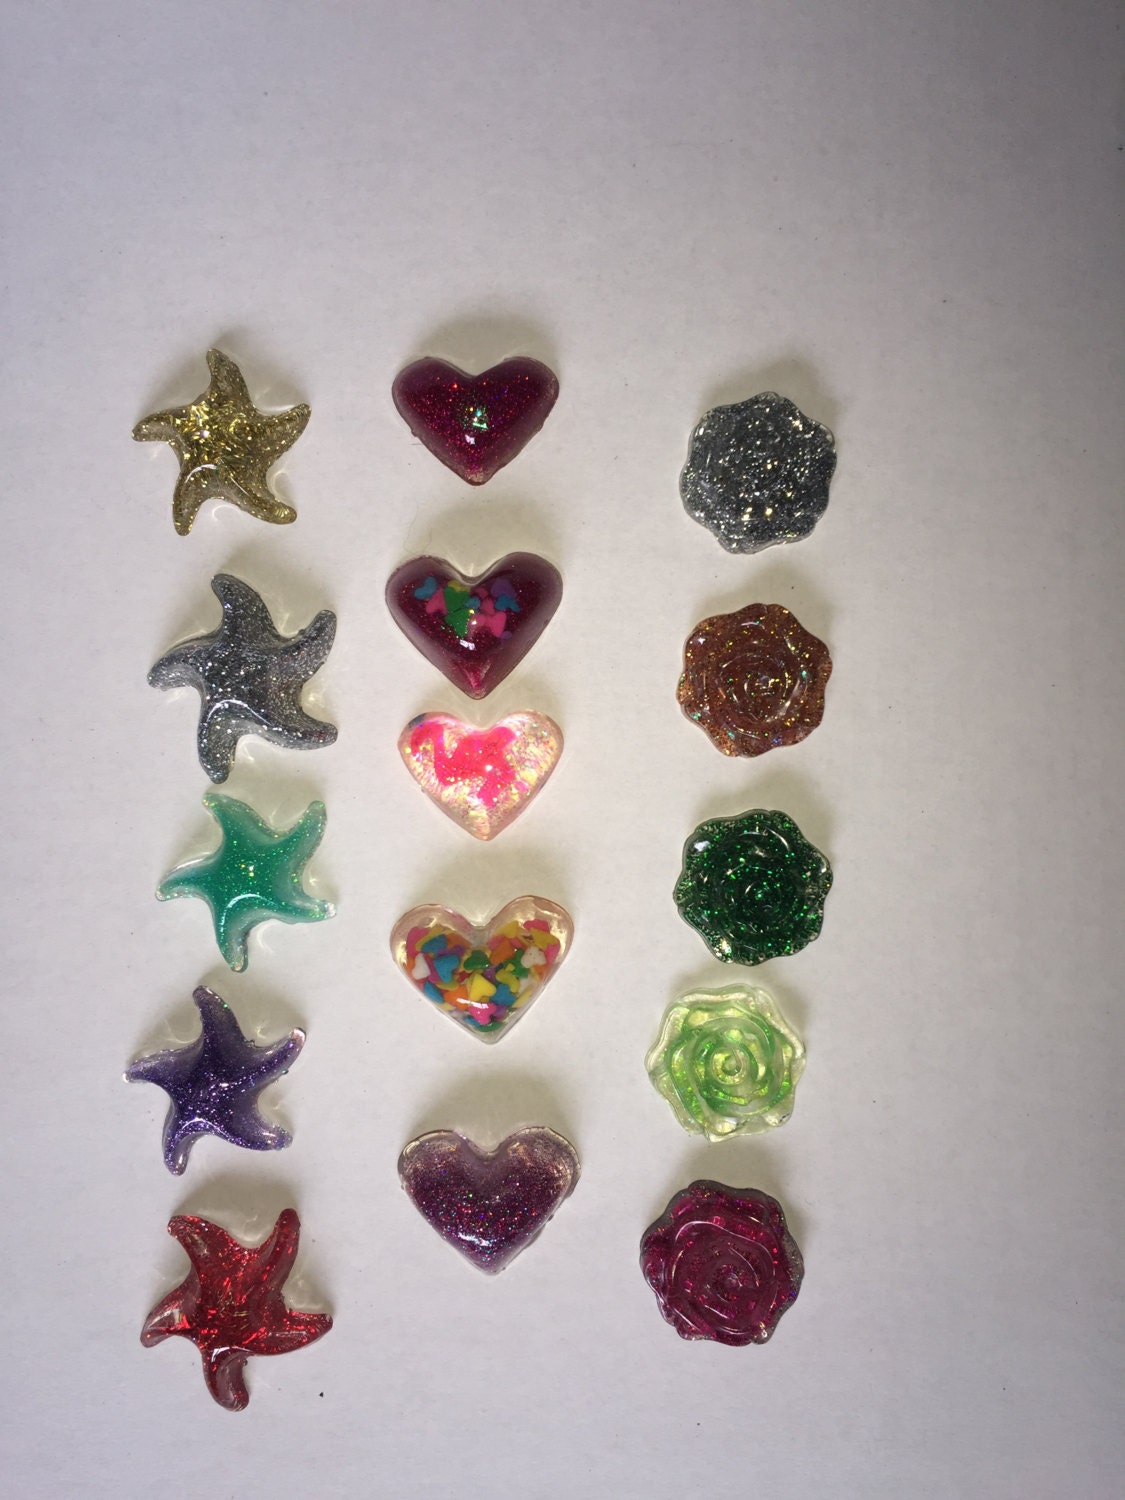 15 One-of-a-Kind Fun Geocaching swag/trinkets made of Glitter